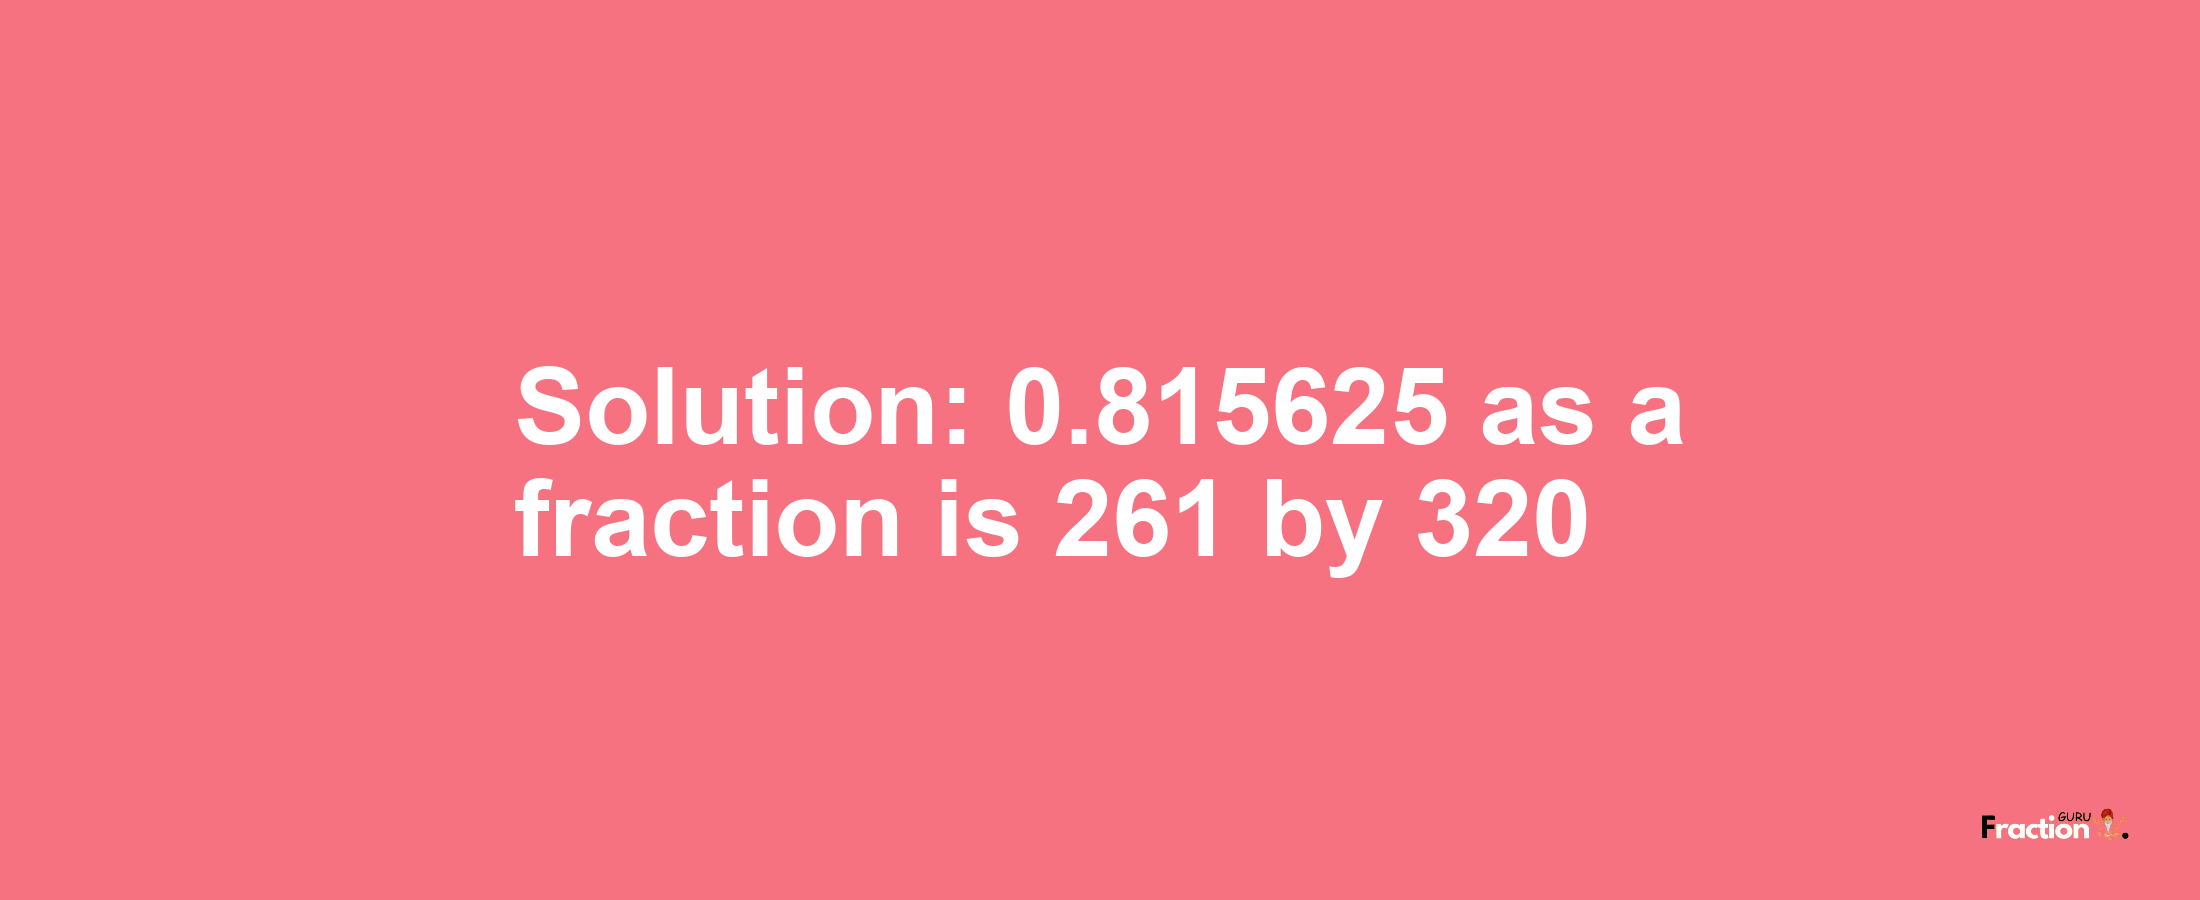 Solution:0.815625 as a fraction is 261/320